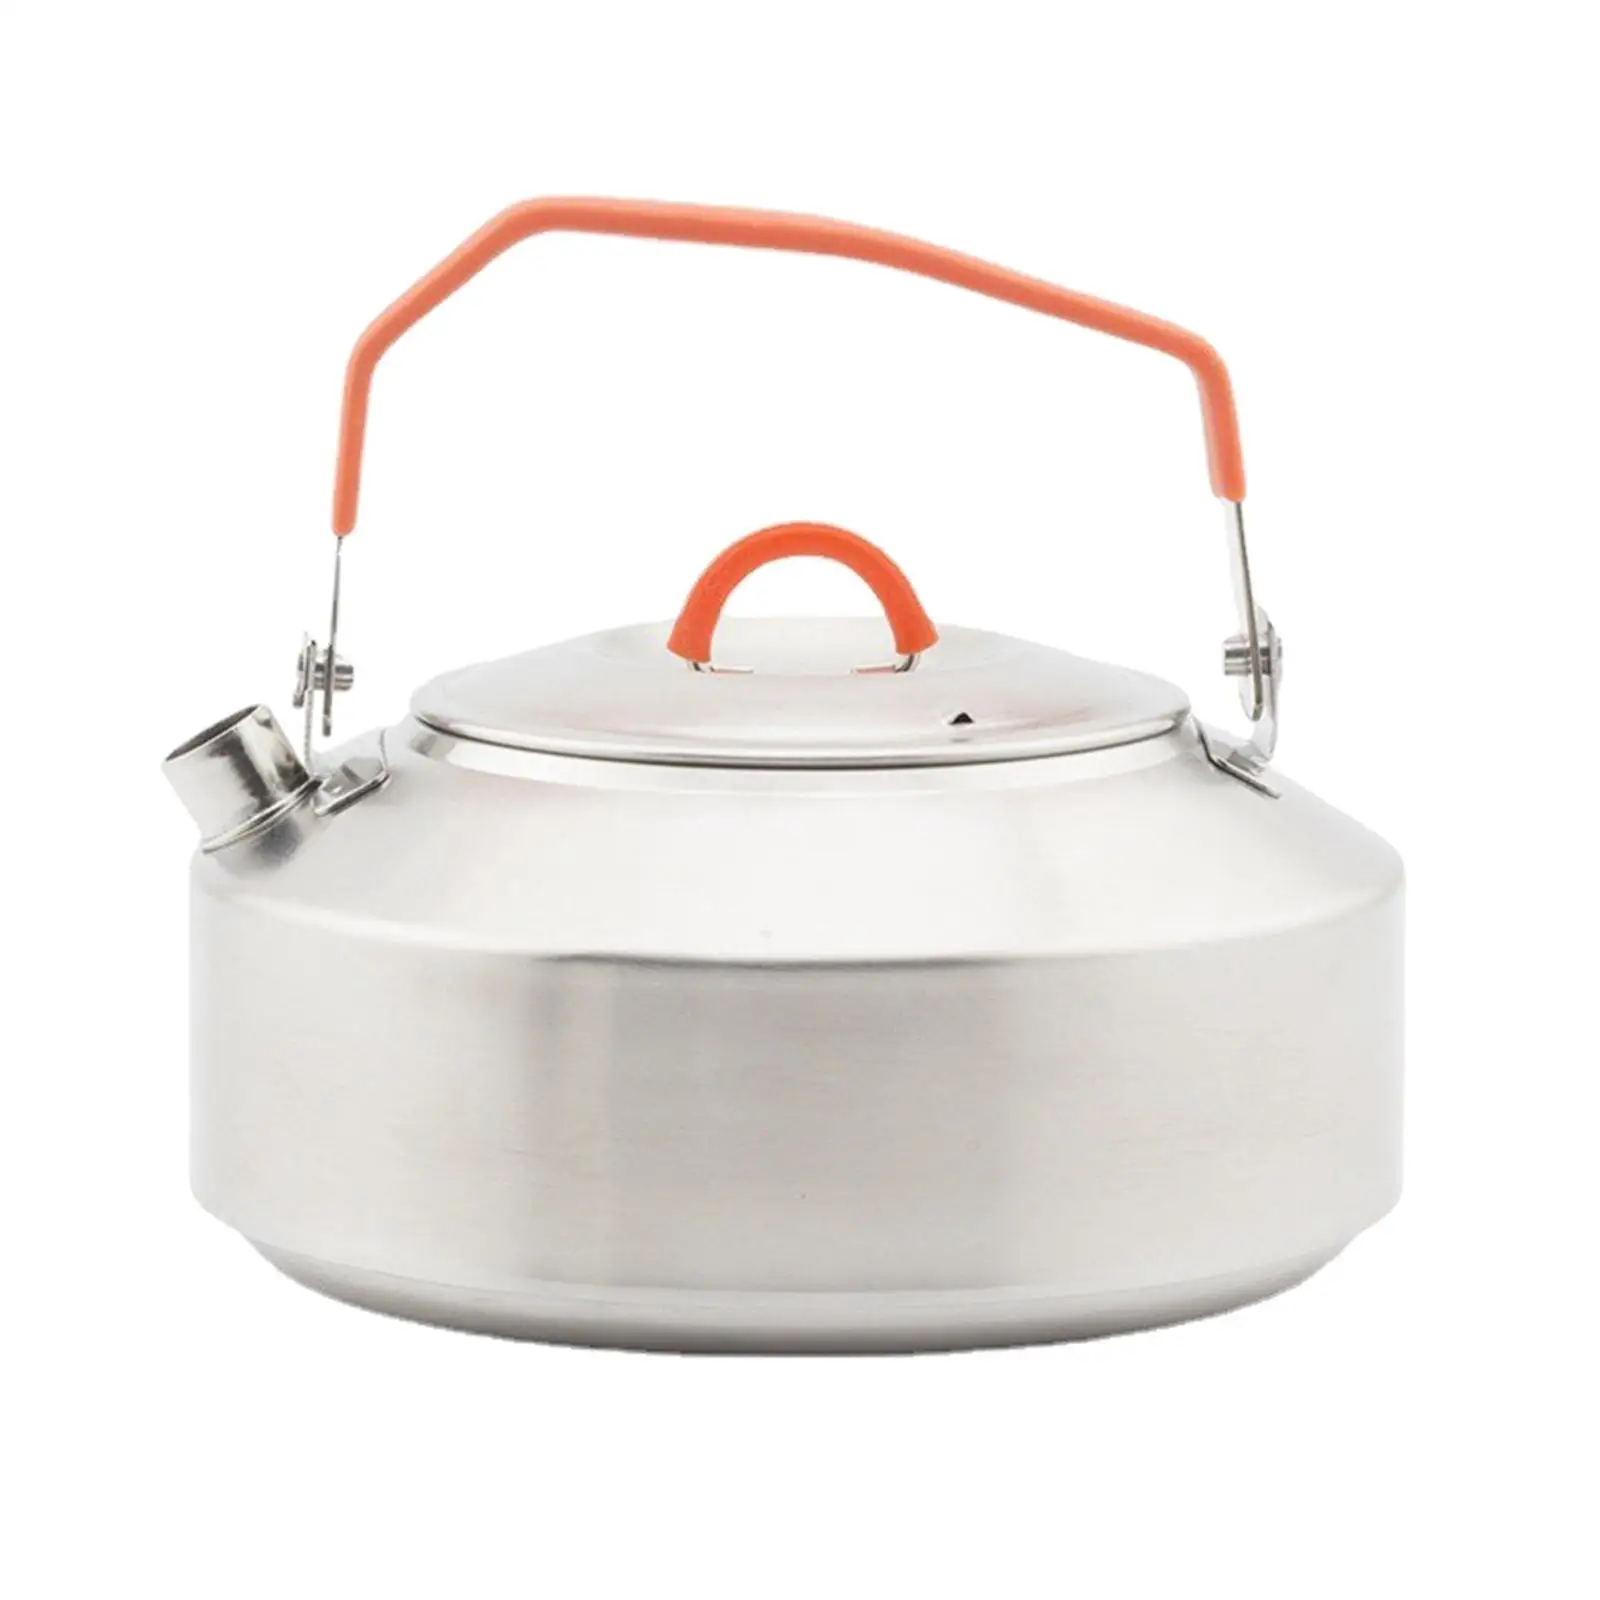 Camping Tea Kettle with Handles Camping Tea Pot for Fishing Backpacking